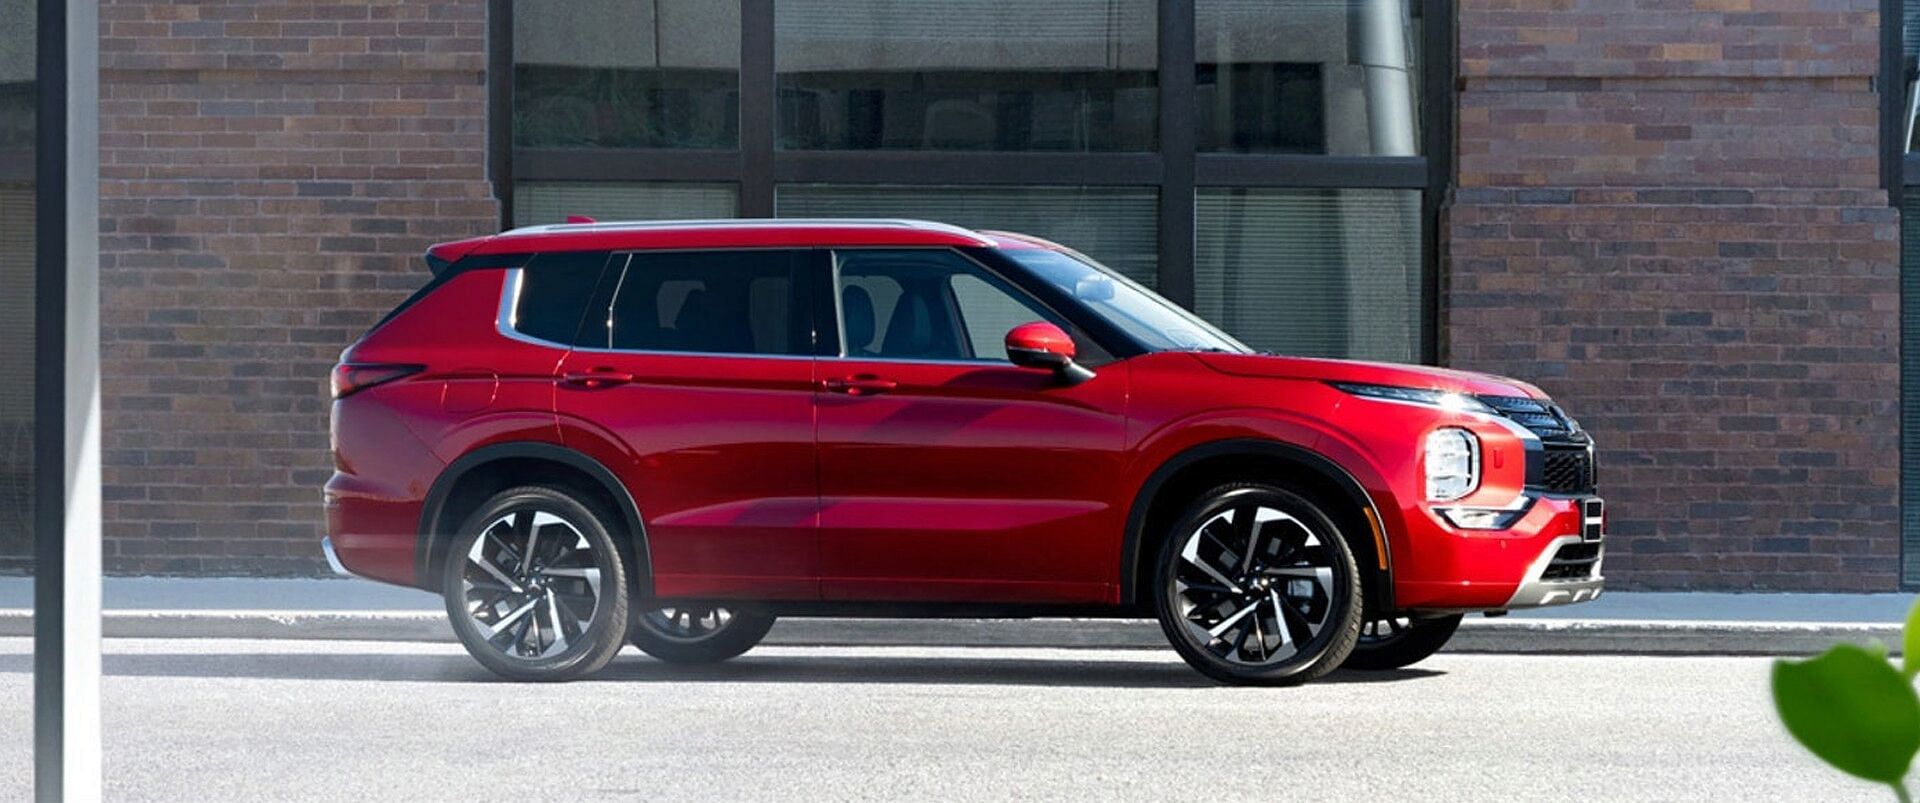 A red 2023 mitsubishi outlander standing on the street. Red brick building with a large window on the middle in the background